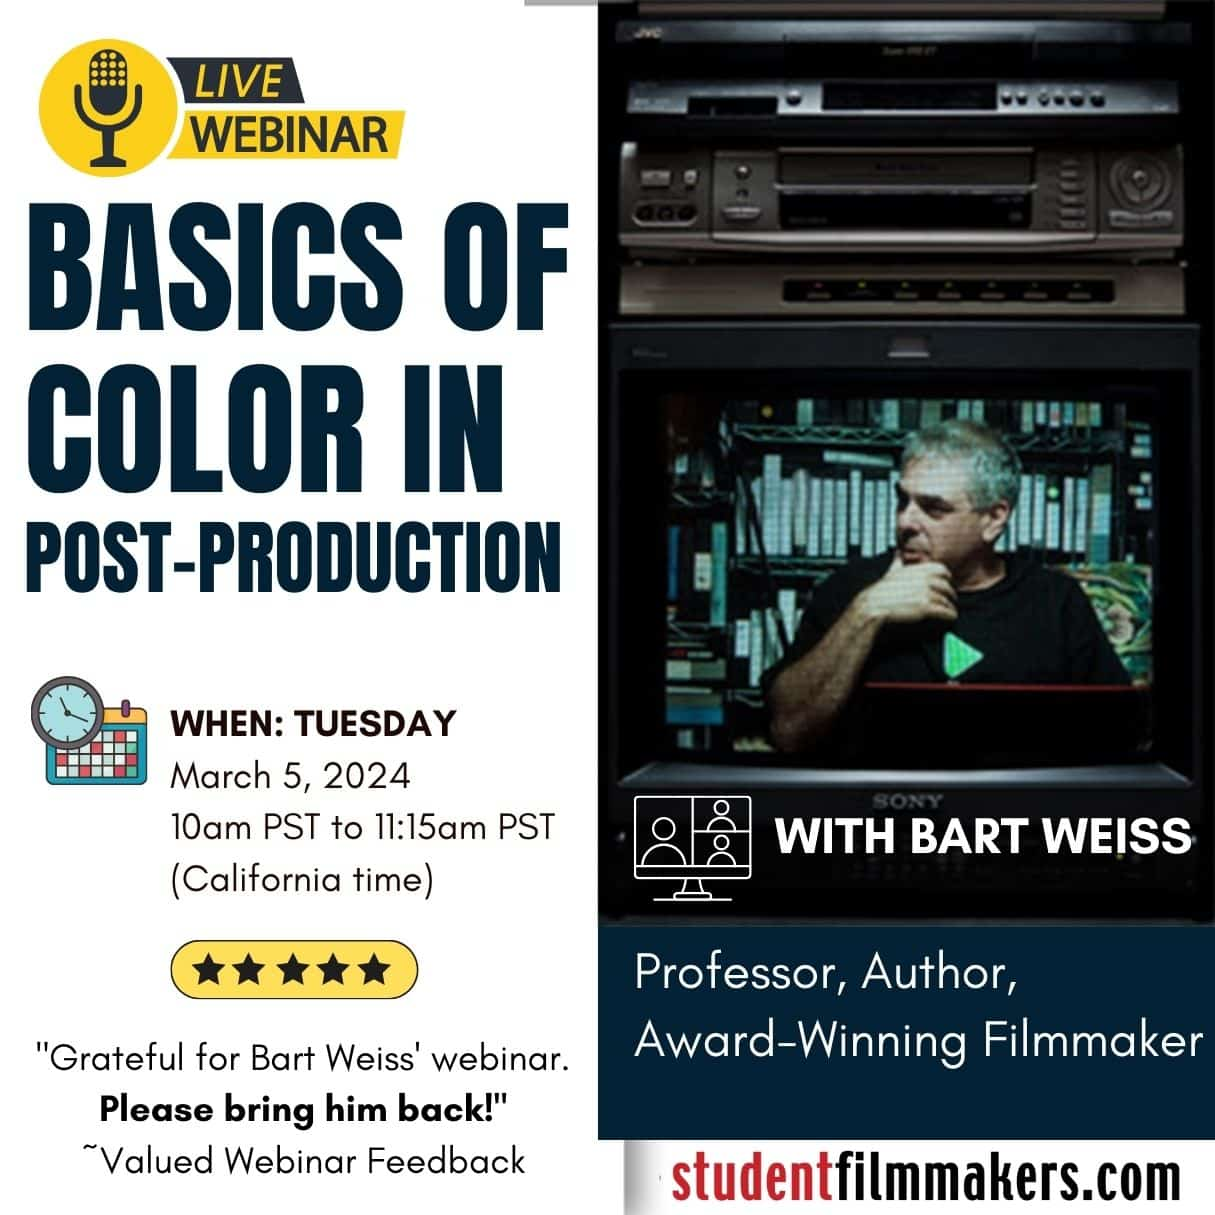 Live Webinar - Basic of Color in Post-Production: Taught by Bart Weiss, Professor, Author, and Award-Winning Filmmaker